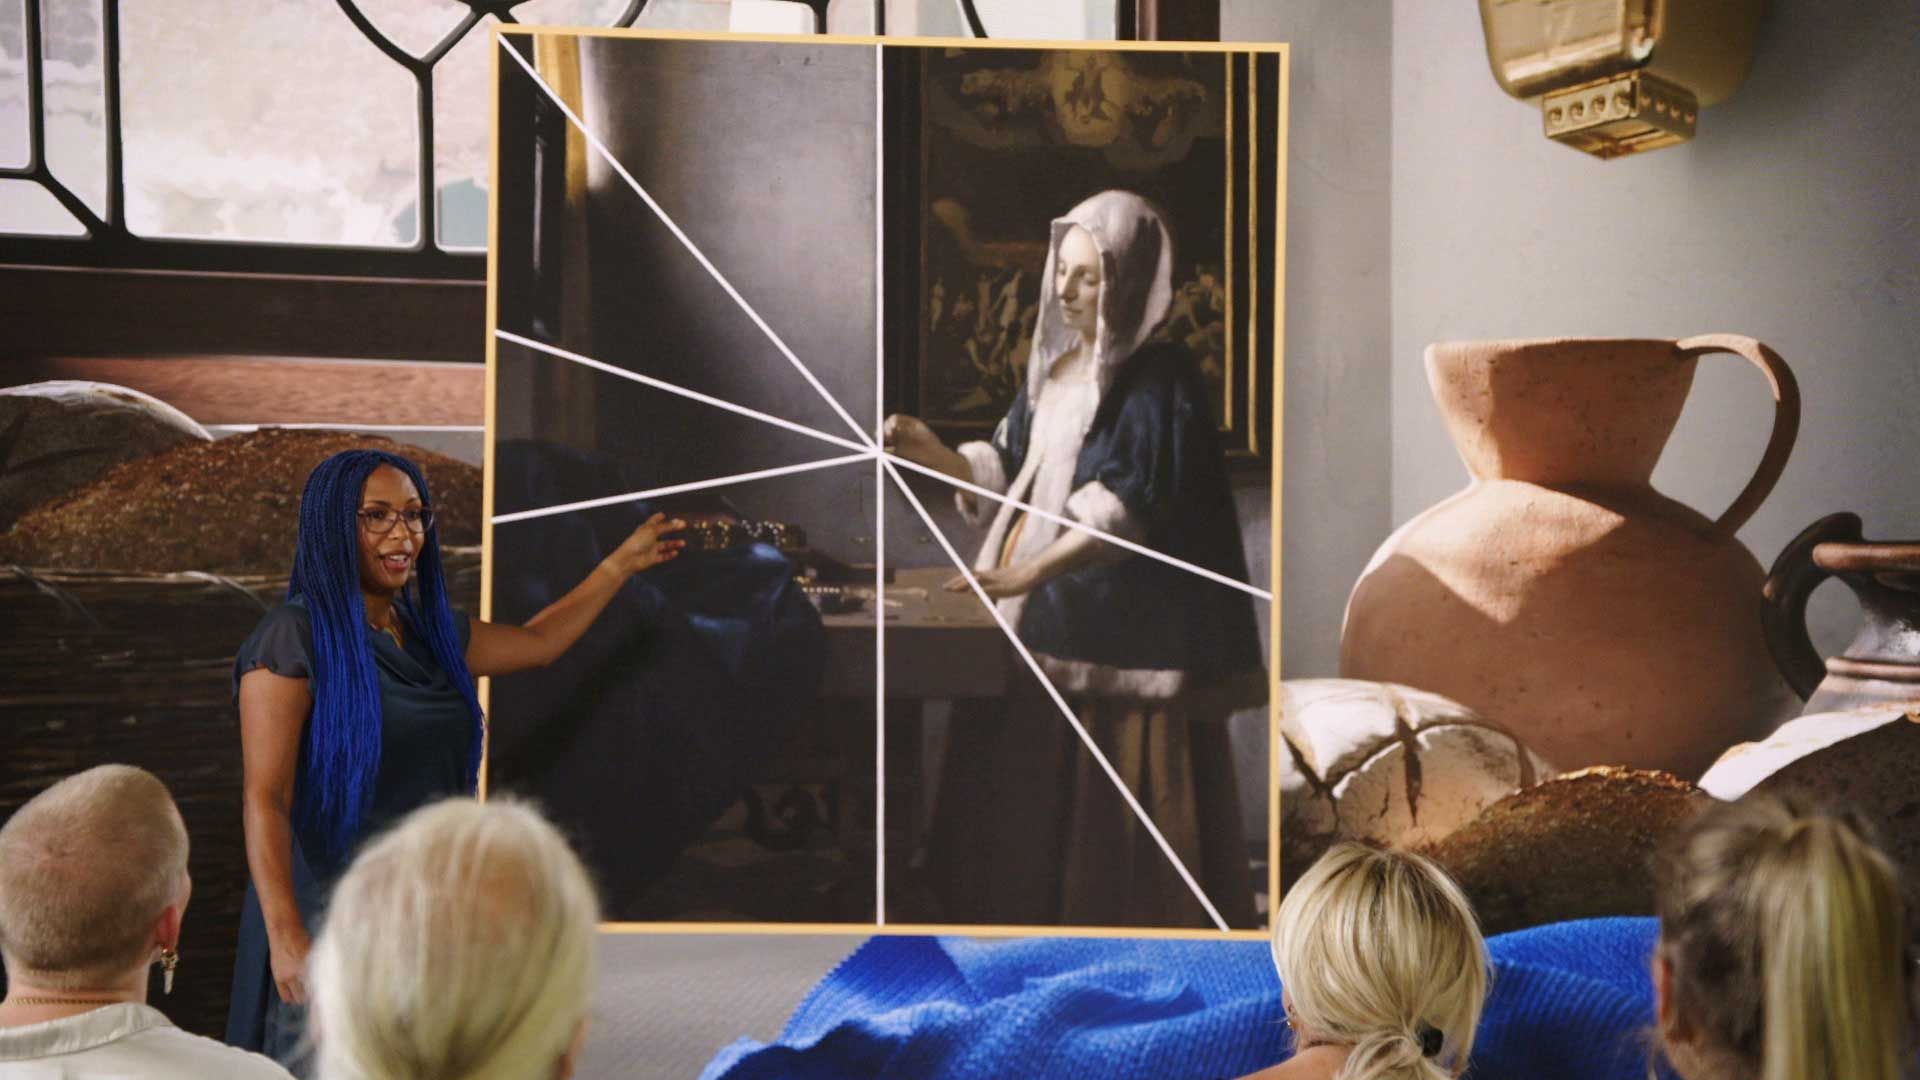 The show’s experts give advice about Vermeer’s lost paintings

courtesy Omroep Max